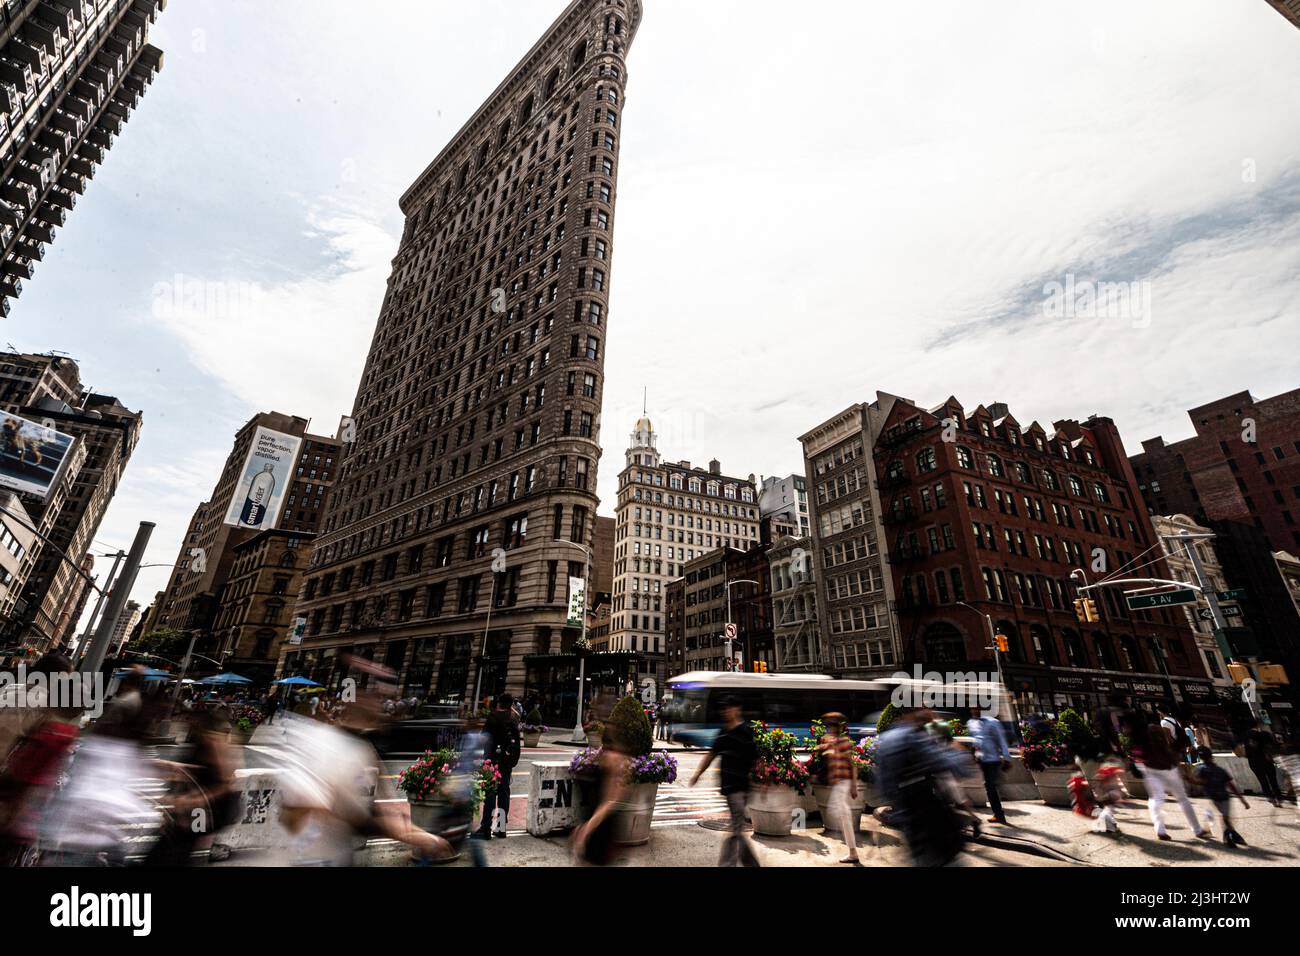 Flatiron Public Plaza, New York City, NY, USA, Slow-shutter shot of the Historic Flatiron or Fuller Building. This iconic triangular building located in Manhattan's Fifth Ave was completed in 1902. Stock Photo